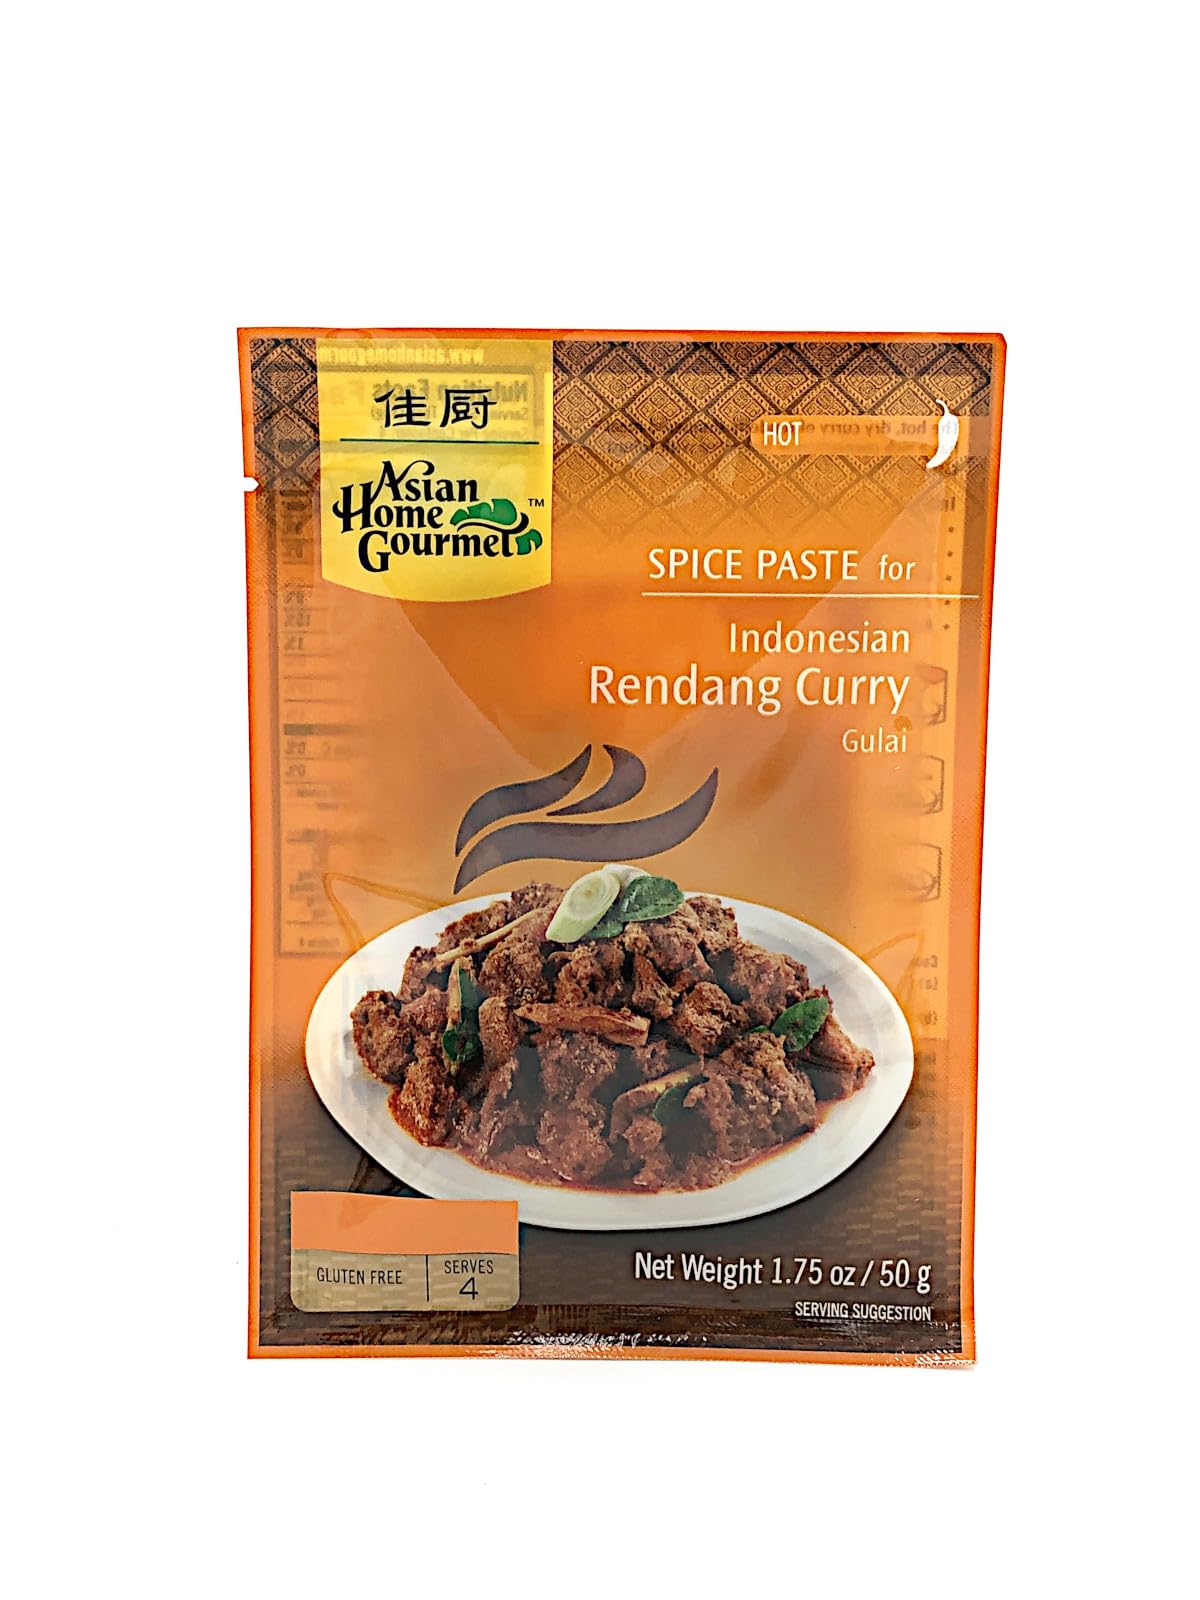 Asian Home Gourmet Spice Paste for: Indonesian Rendang Curry (Gulai)